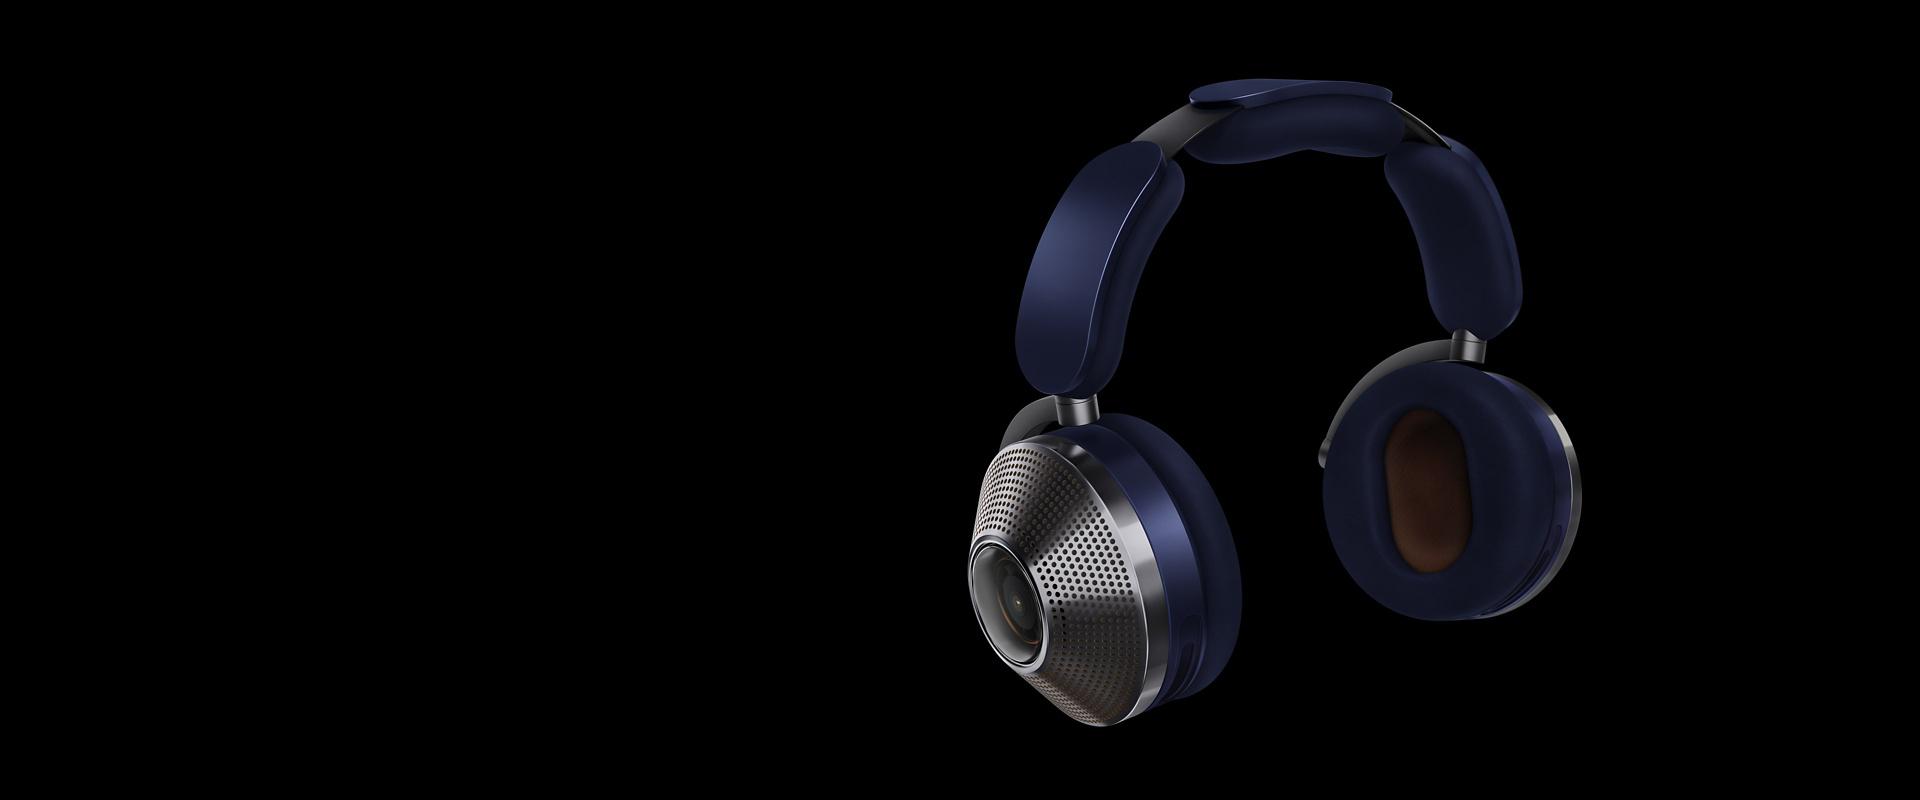 Dyson Zone headphones with air purification.